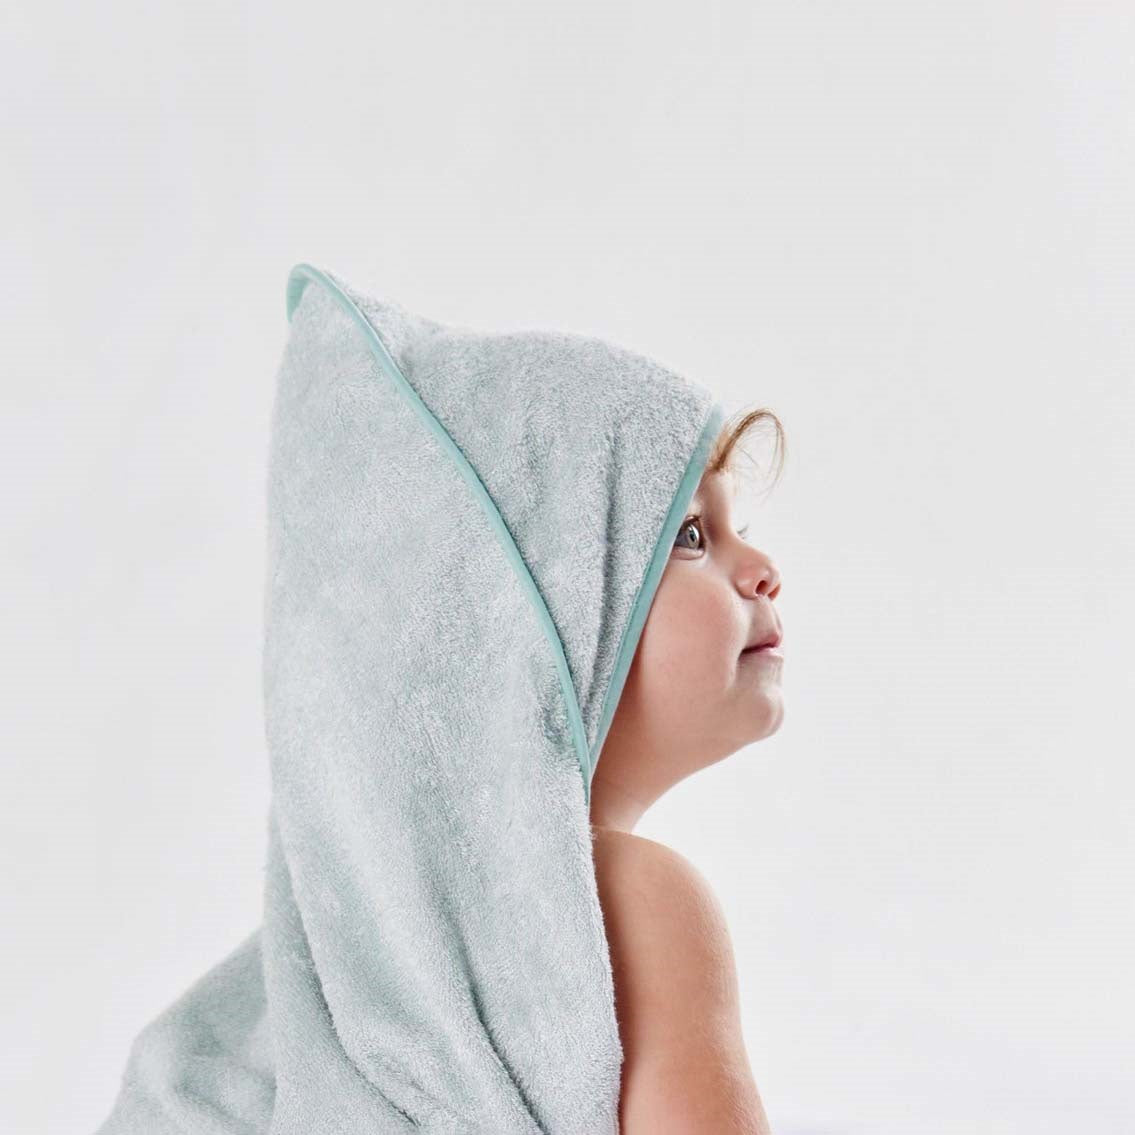 Toddler wearing a Little Bamboo hooded towel 